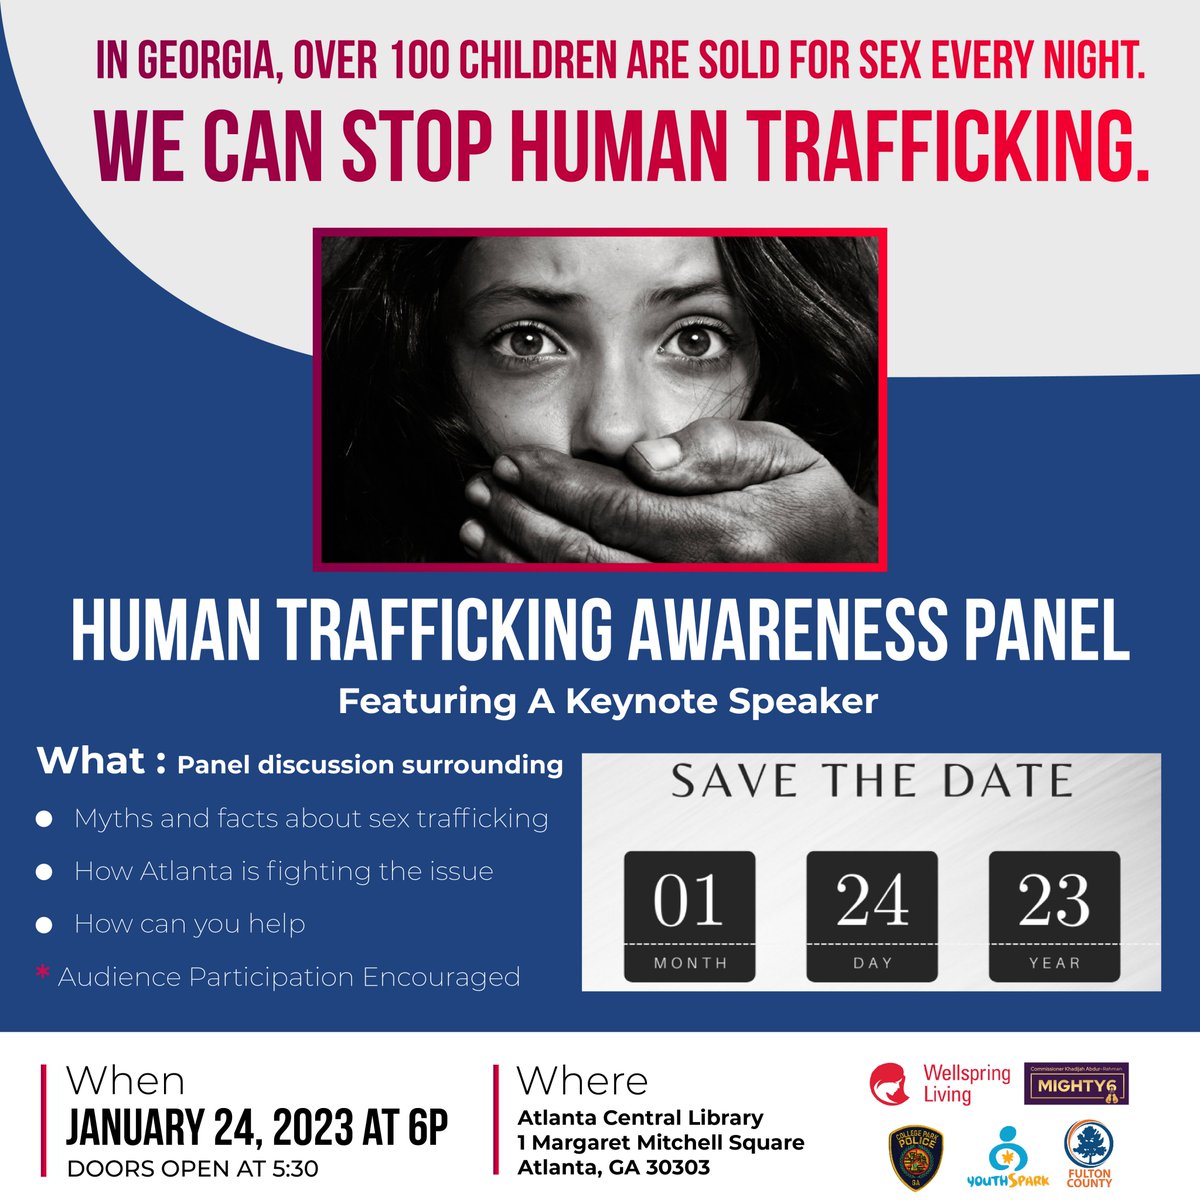 Please Click the link and Join Me - eventbrite.com/e/human-traffi…